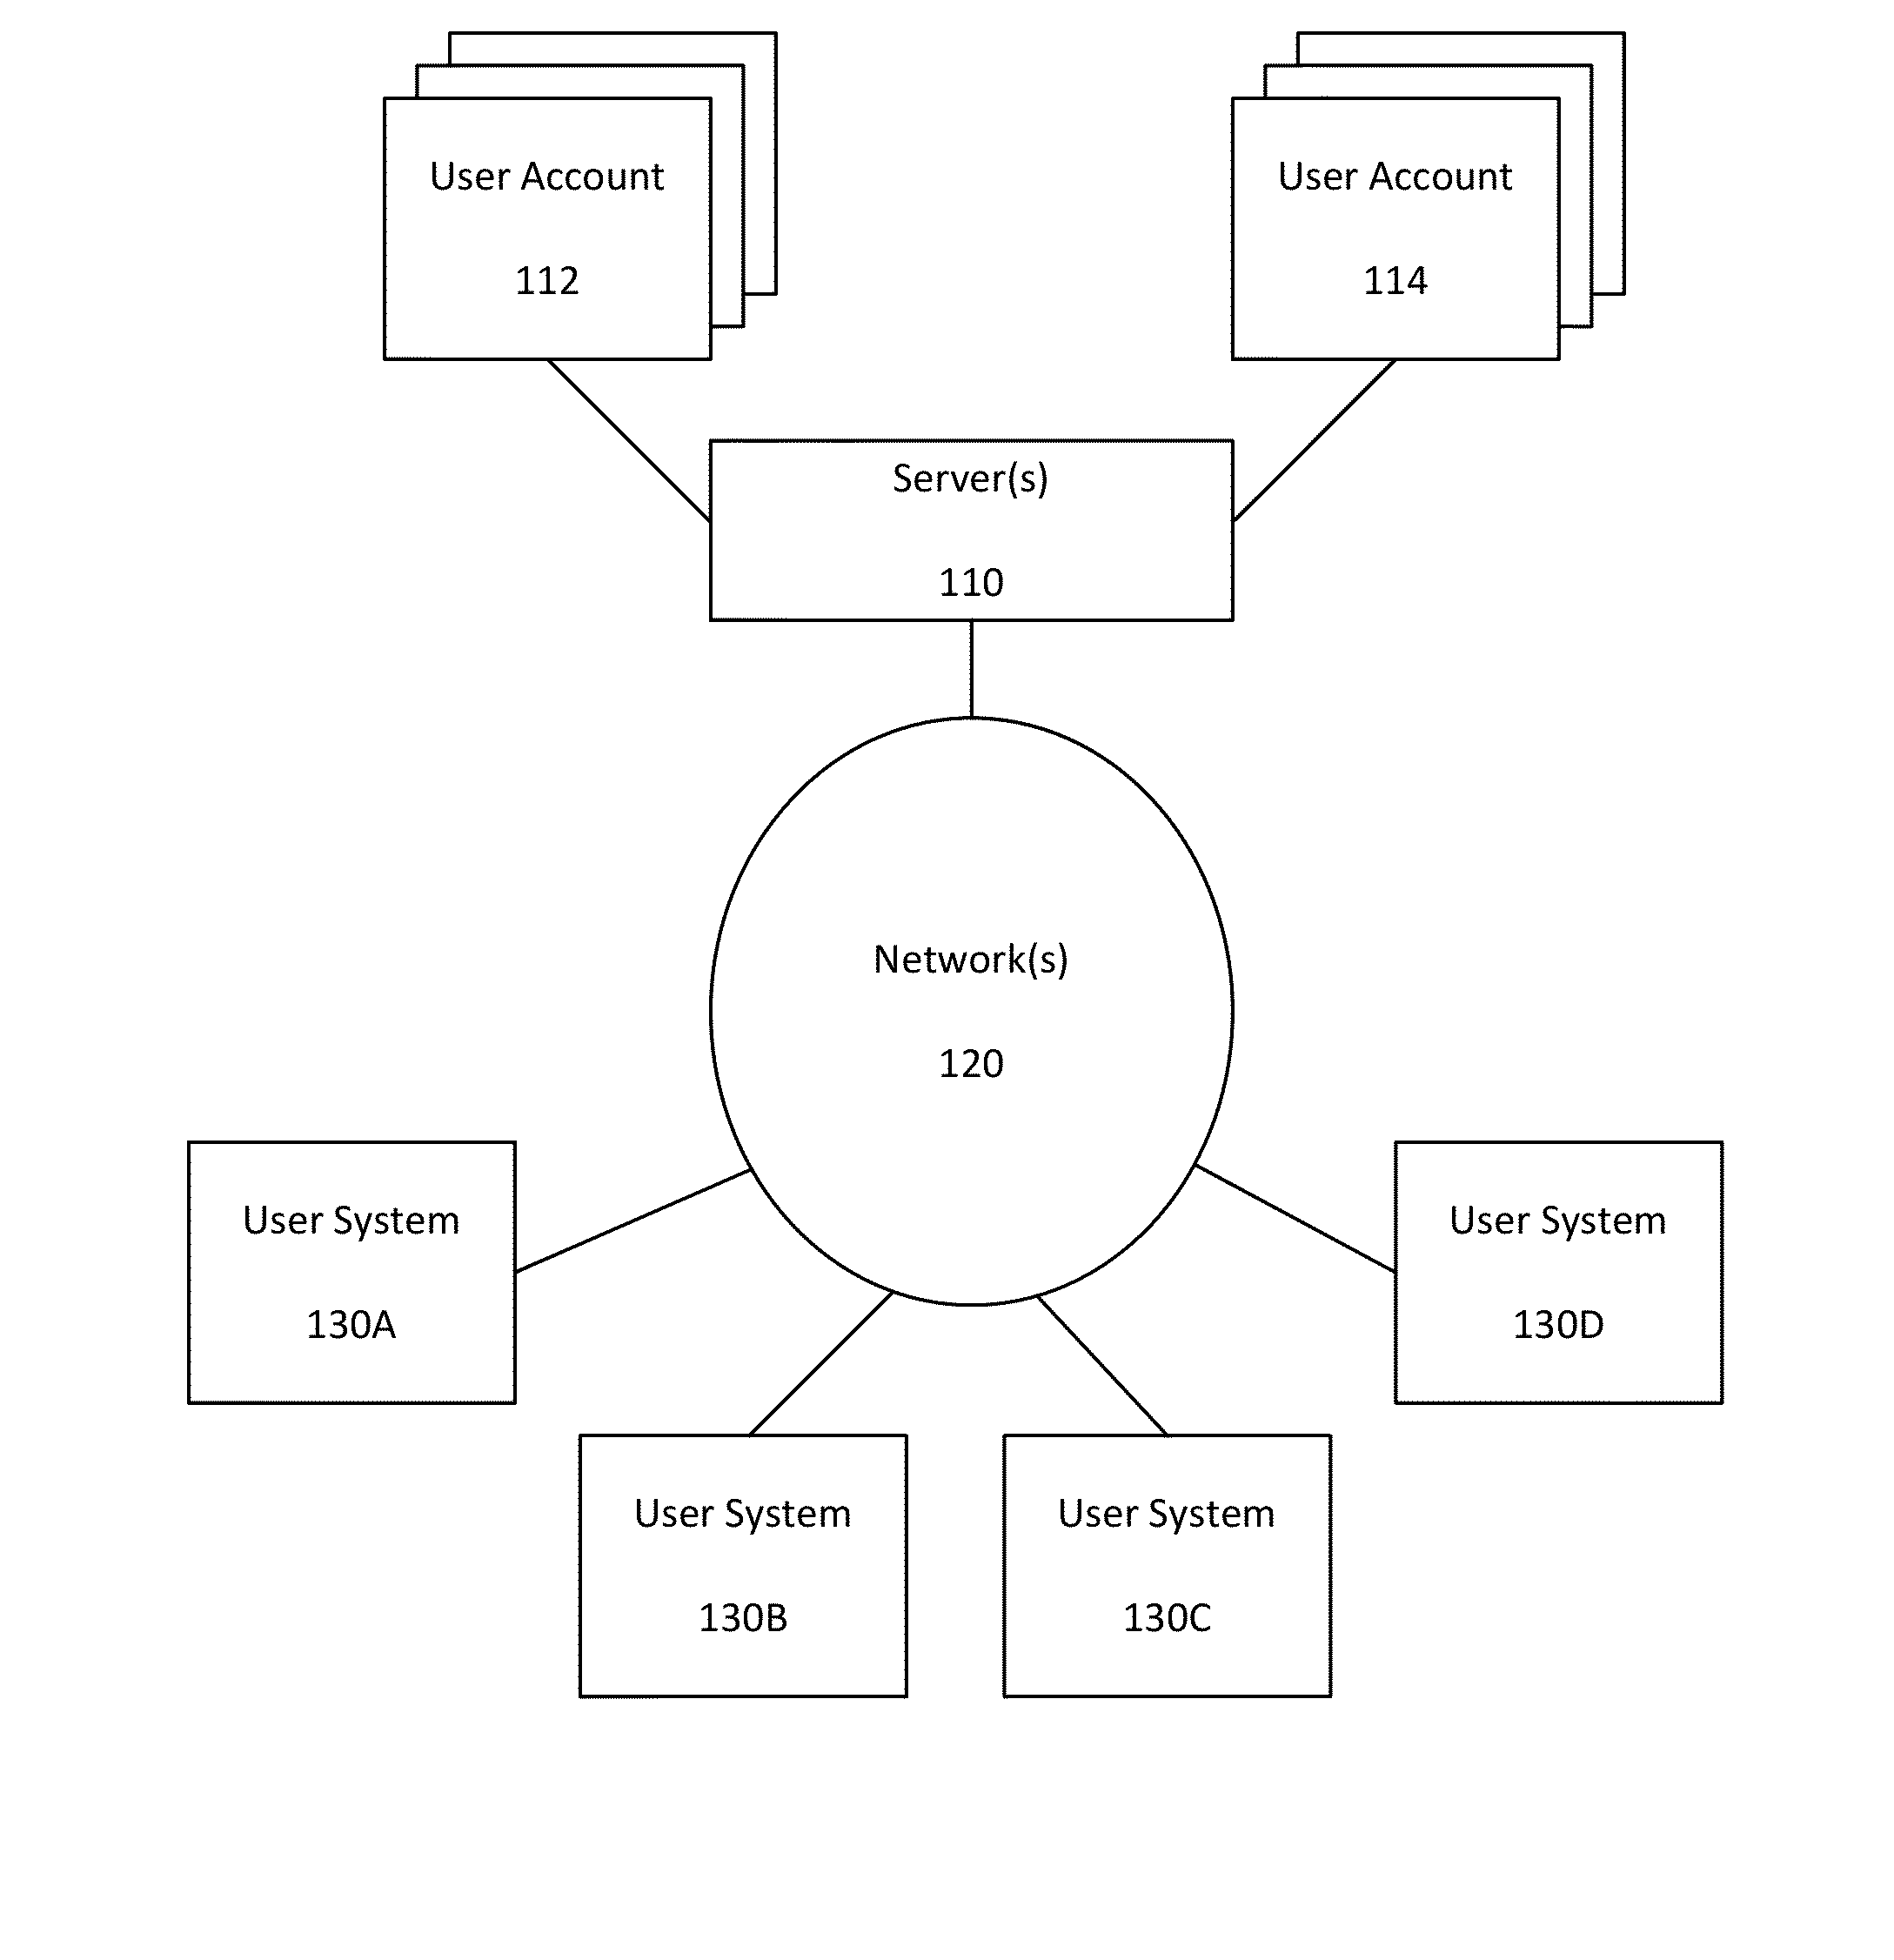 Systems and methods for ranking and filtering professionals based on user input and activity and interfacing with professionals within an online community